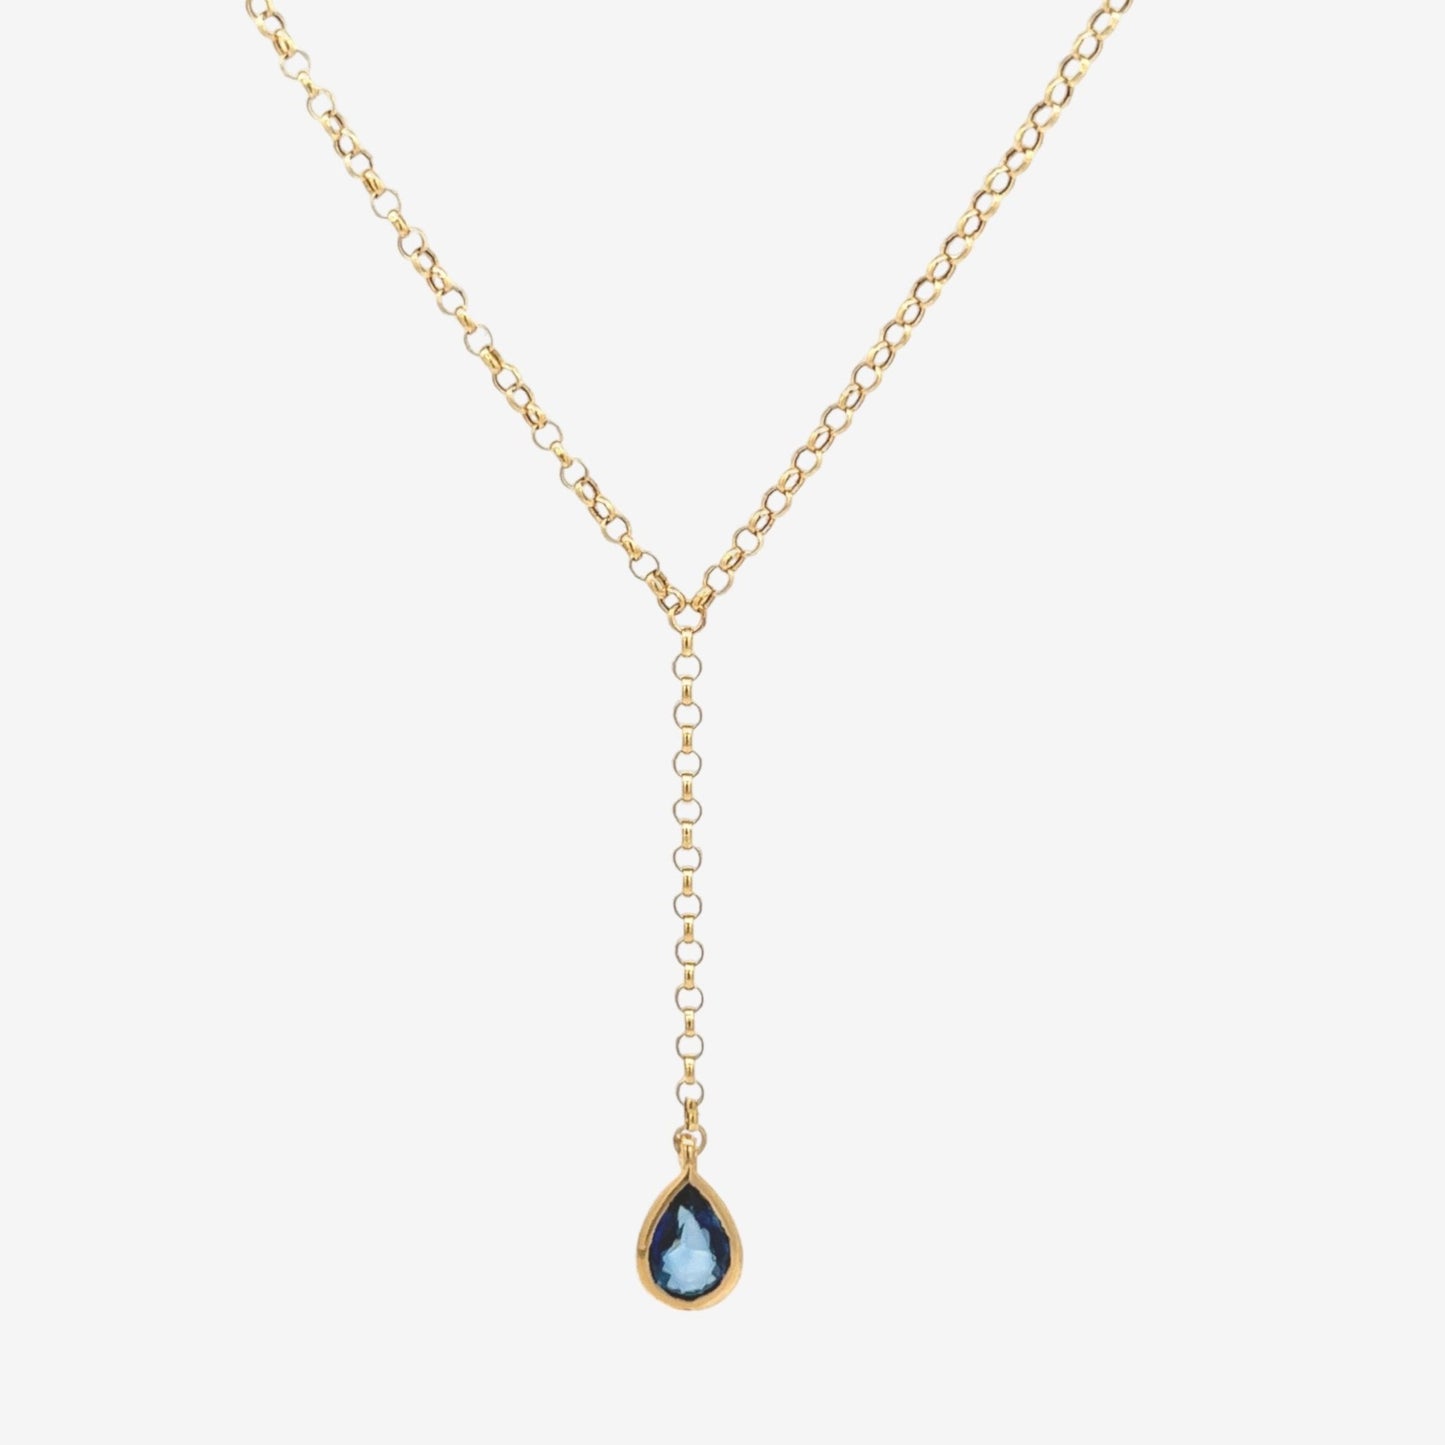 Louise Necklace in Sapphire - 18k Gold - Lynor